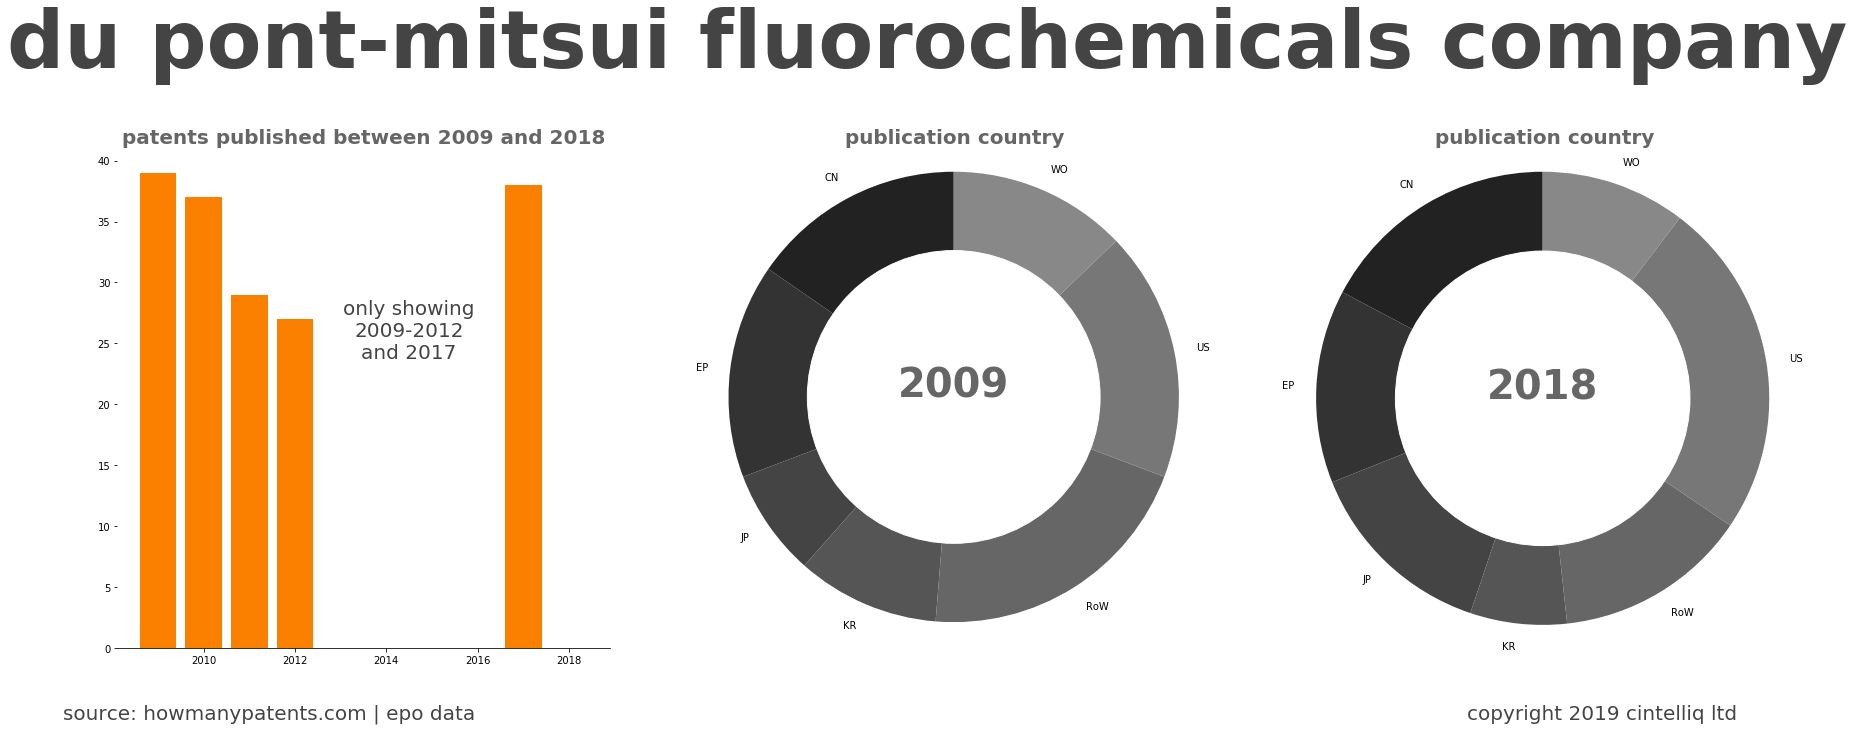 summary of patents for Du Pont-Mitsui Fluorochemicals Company